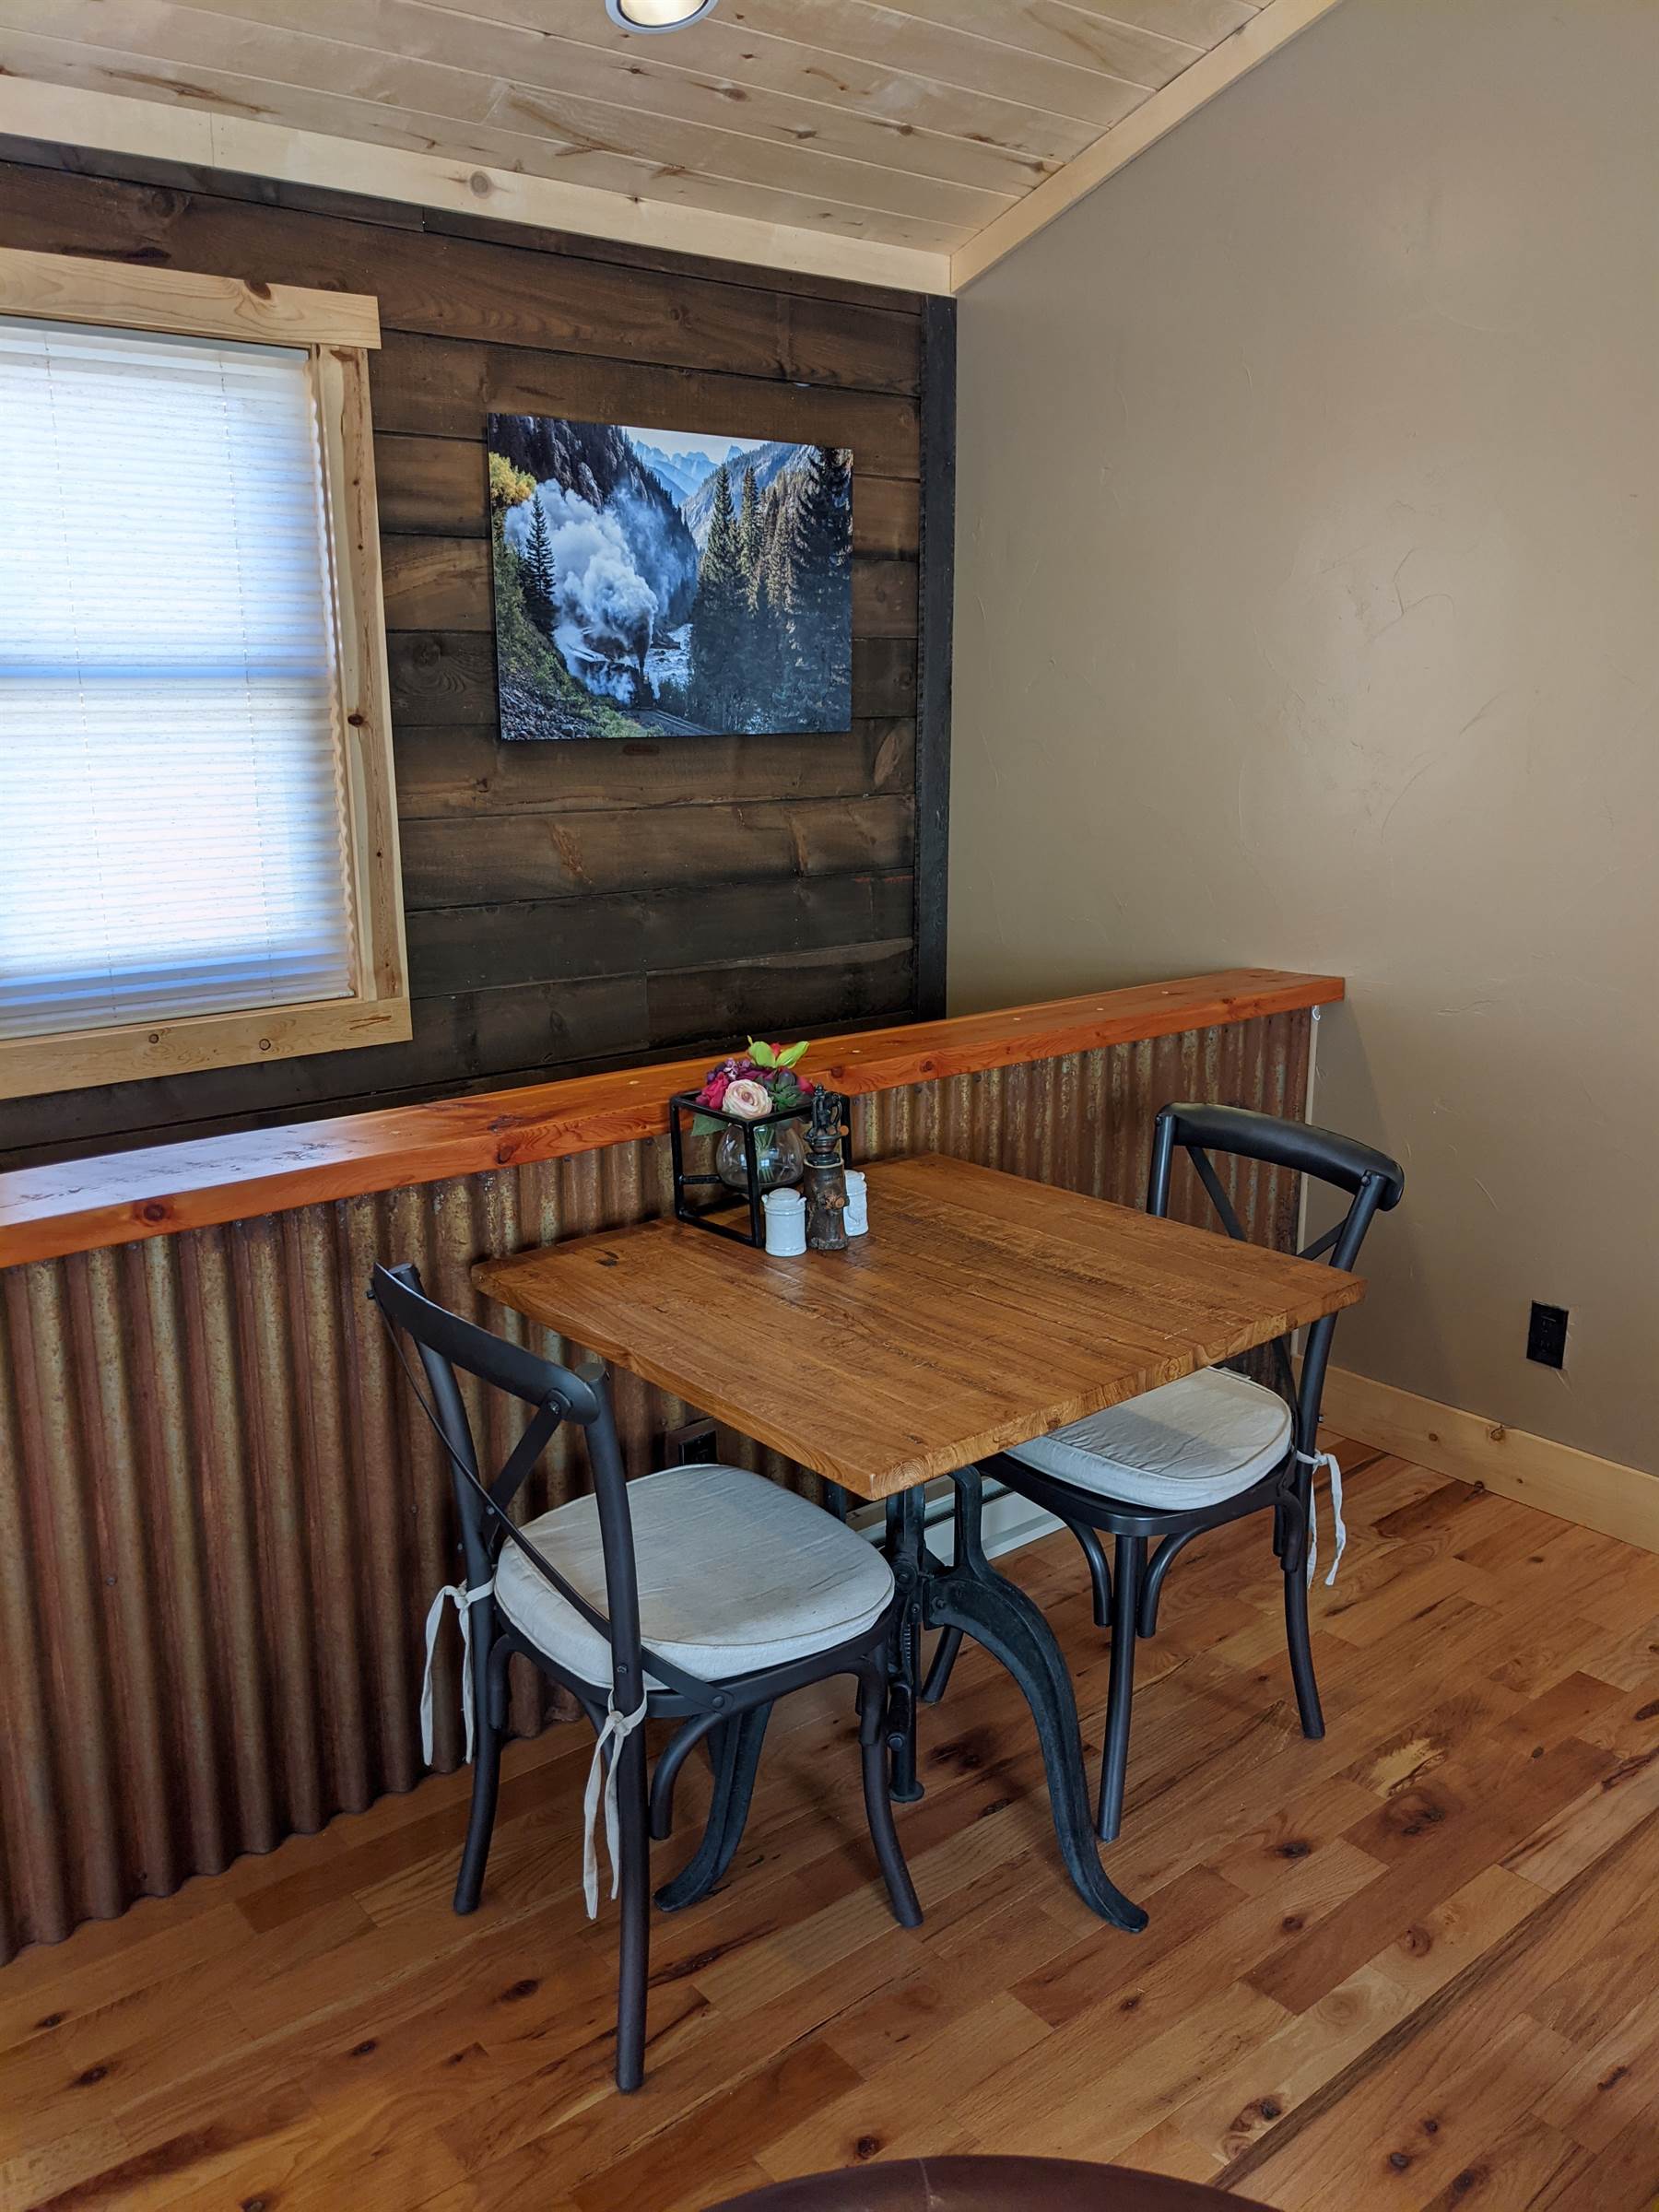 421 2nd Street, Ouray, CO 81427